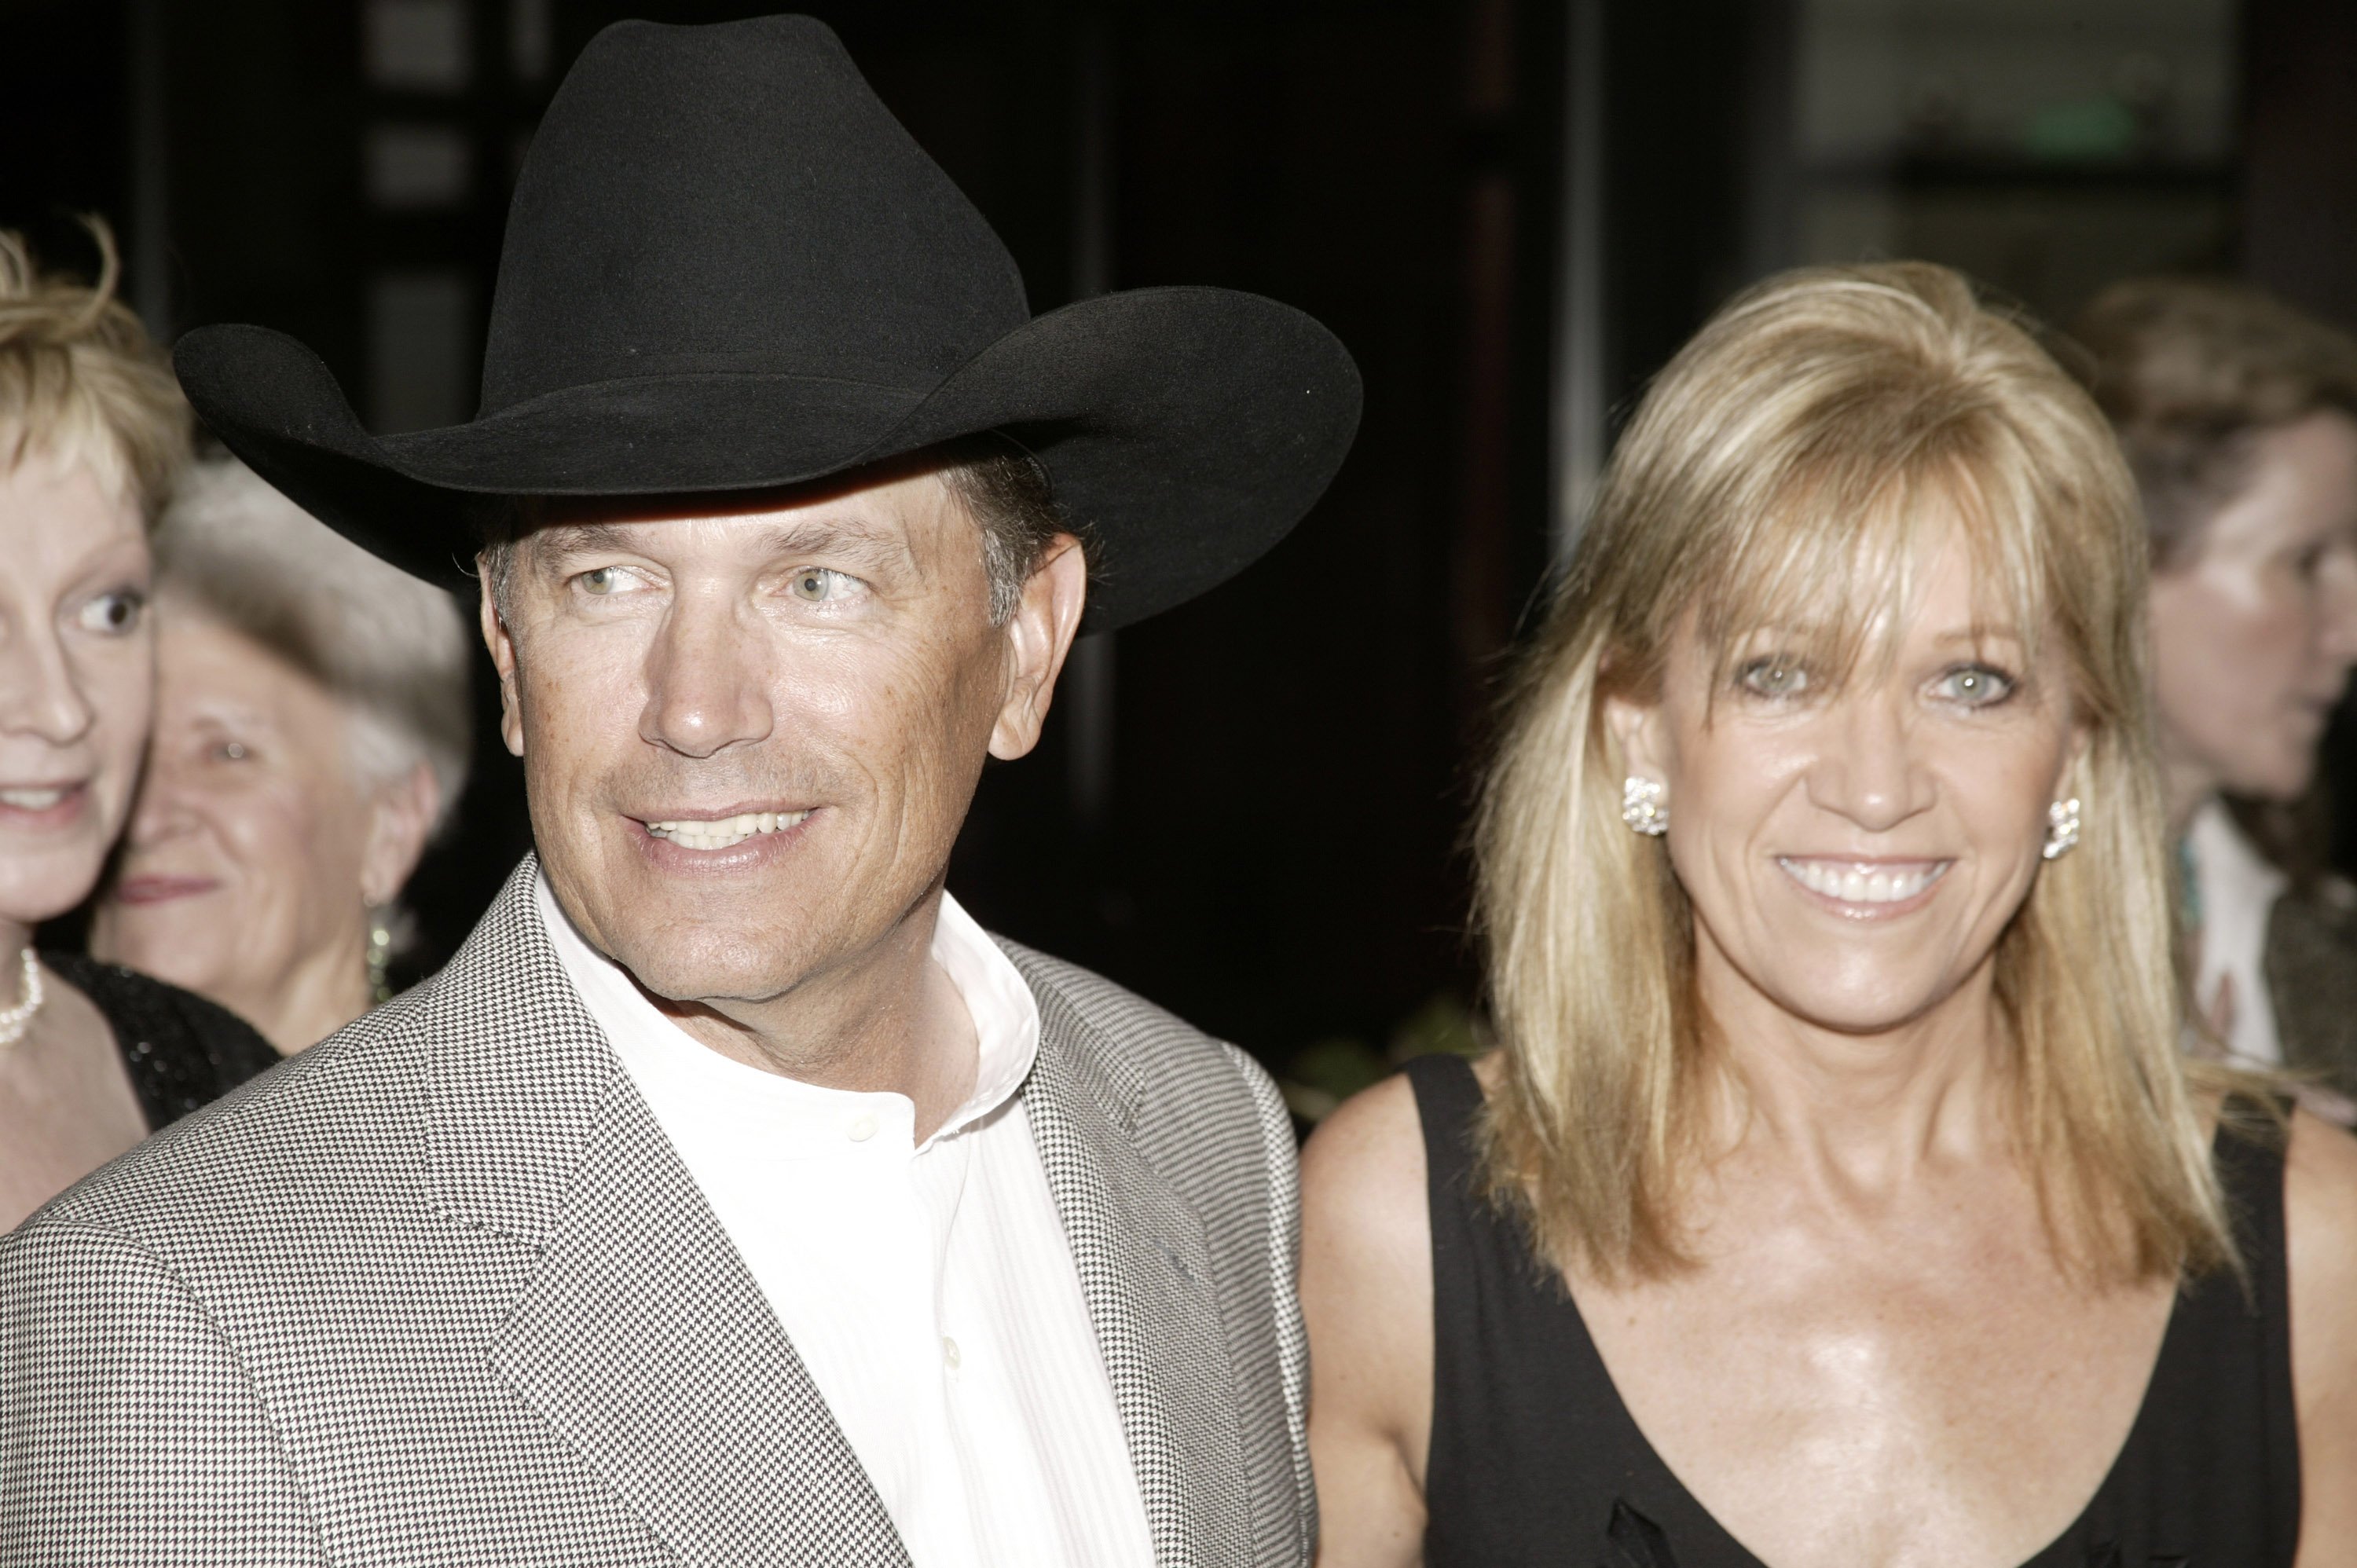 George Strait and his wife Norma arrive at the red carpet during the 2007 Country Music Hall of Fame Medallion Ceremony | Source: Getty Images 